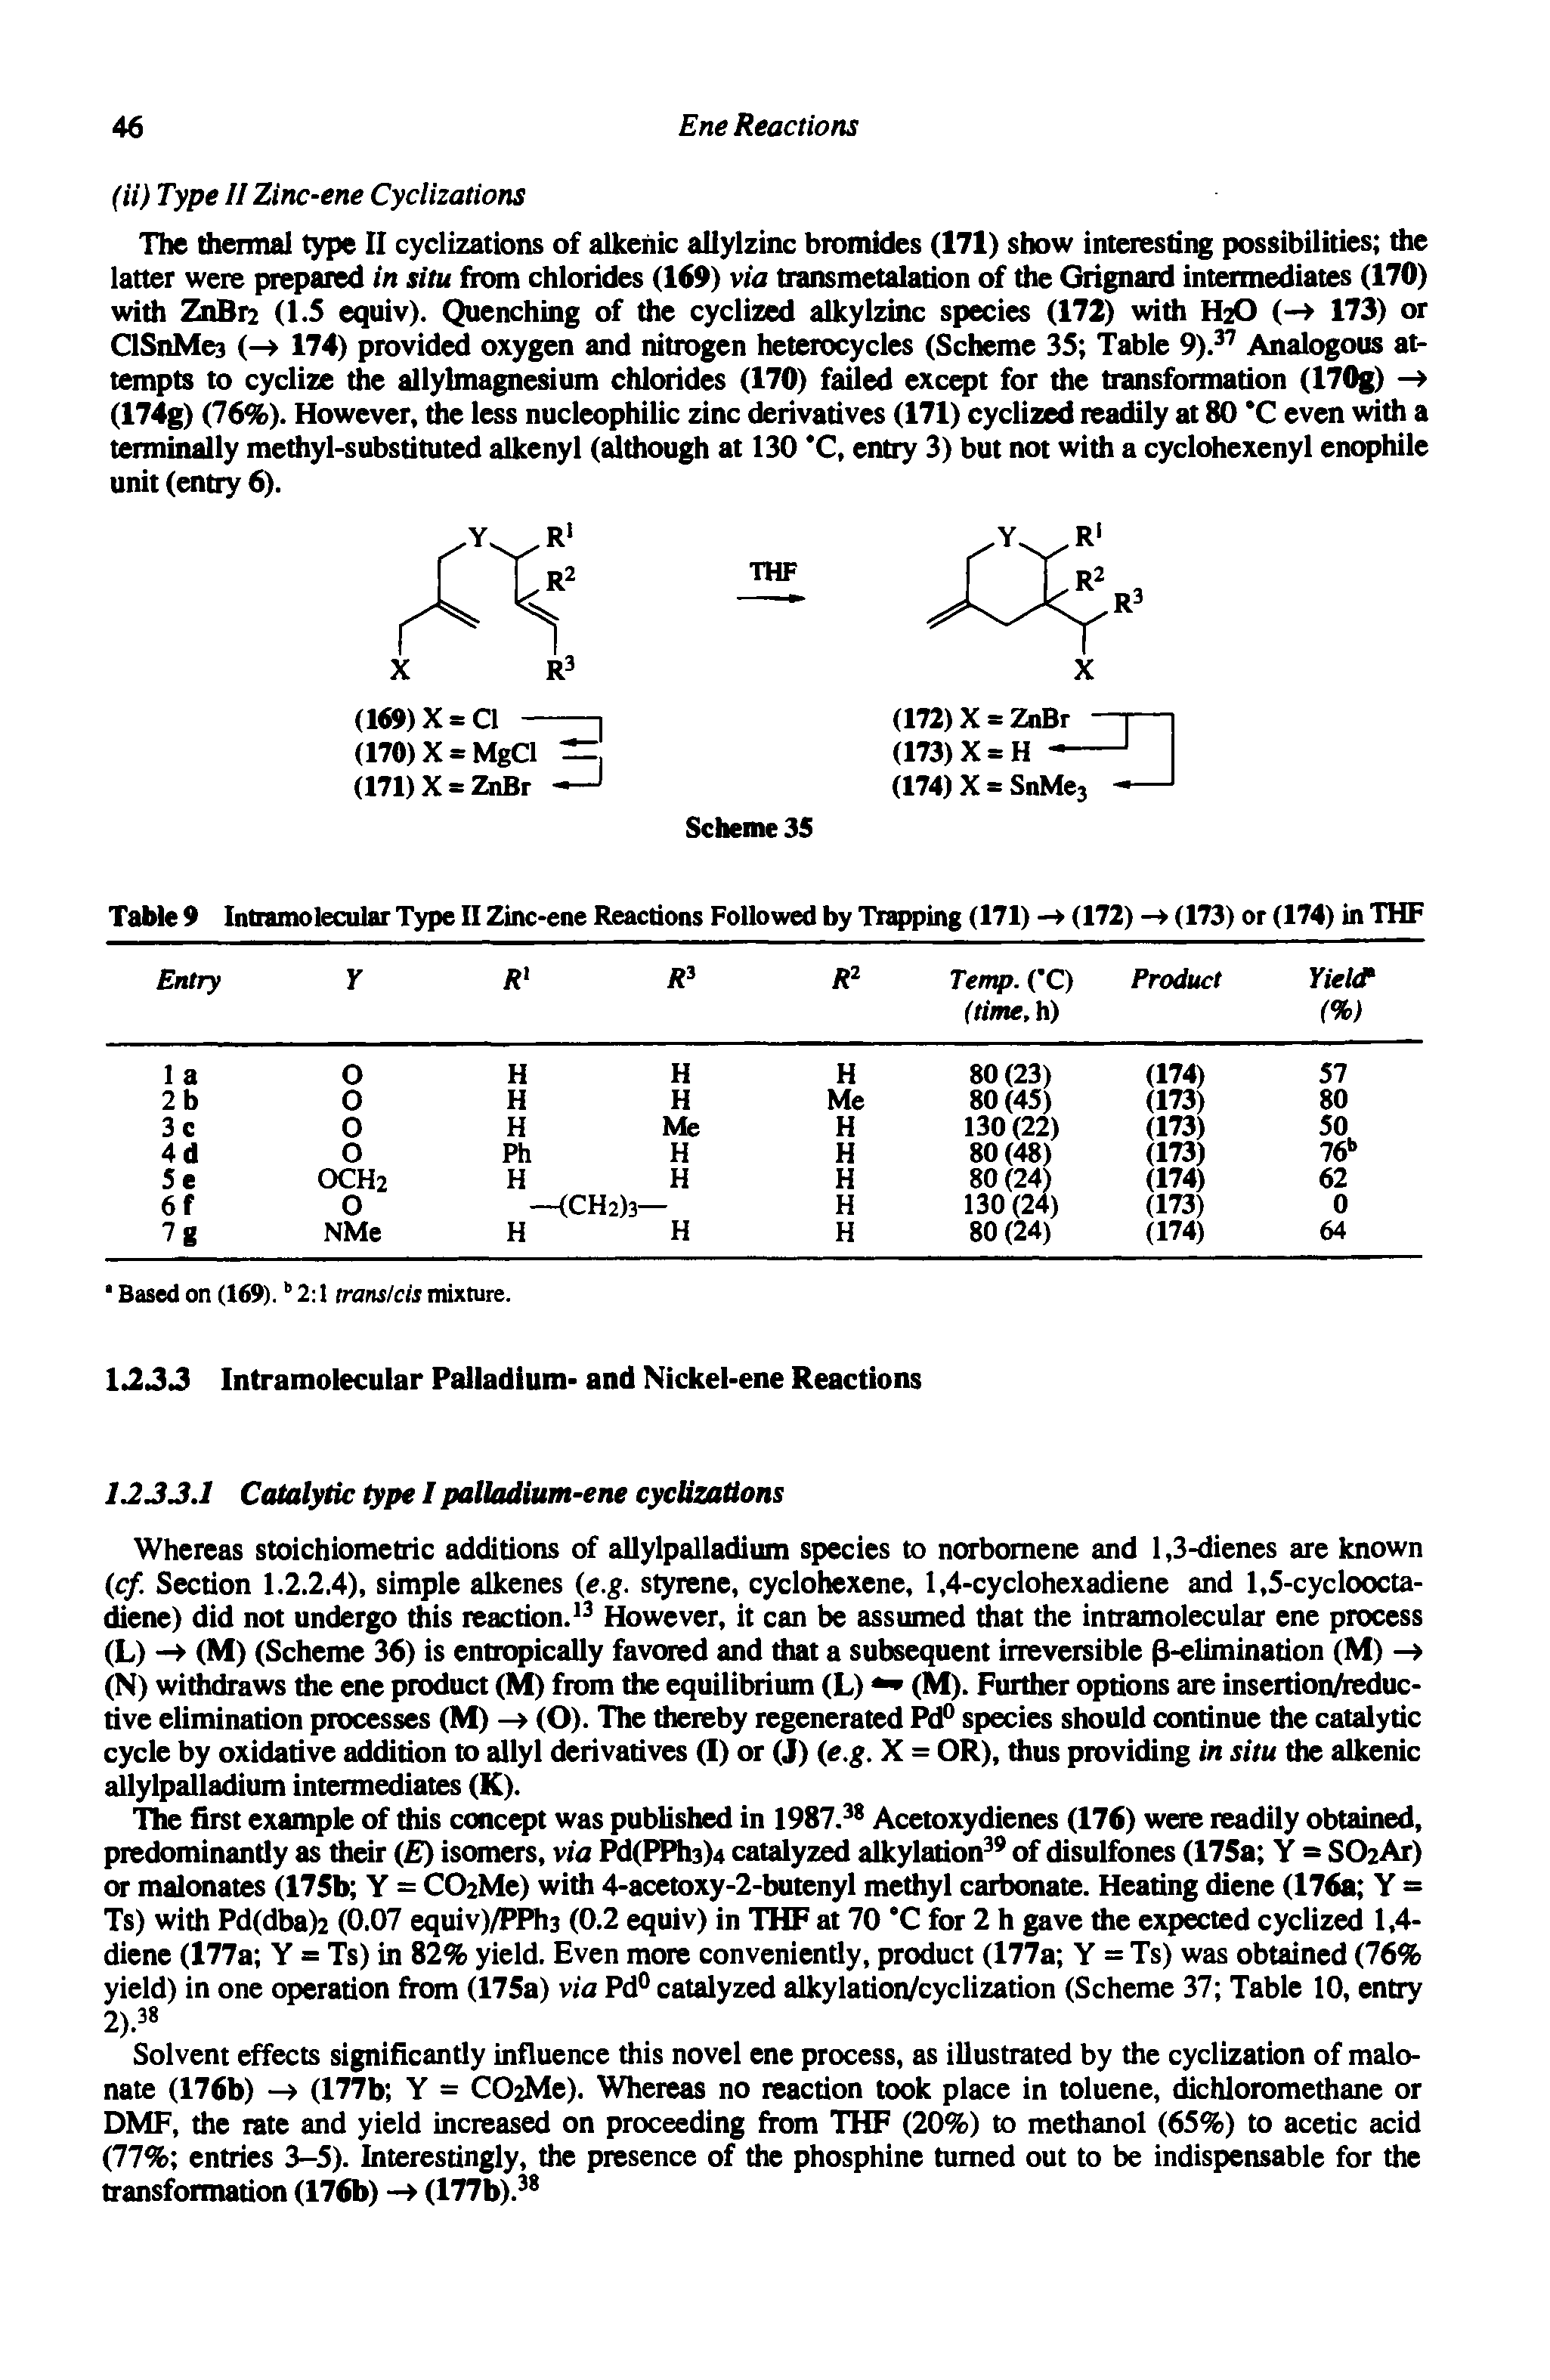 Table 9 Intramolecular Type II Zinc-ene Reactions Followed by Trapping (171) - (172) - (173) or (174) in THF...